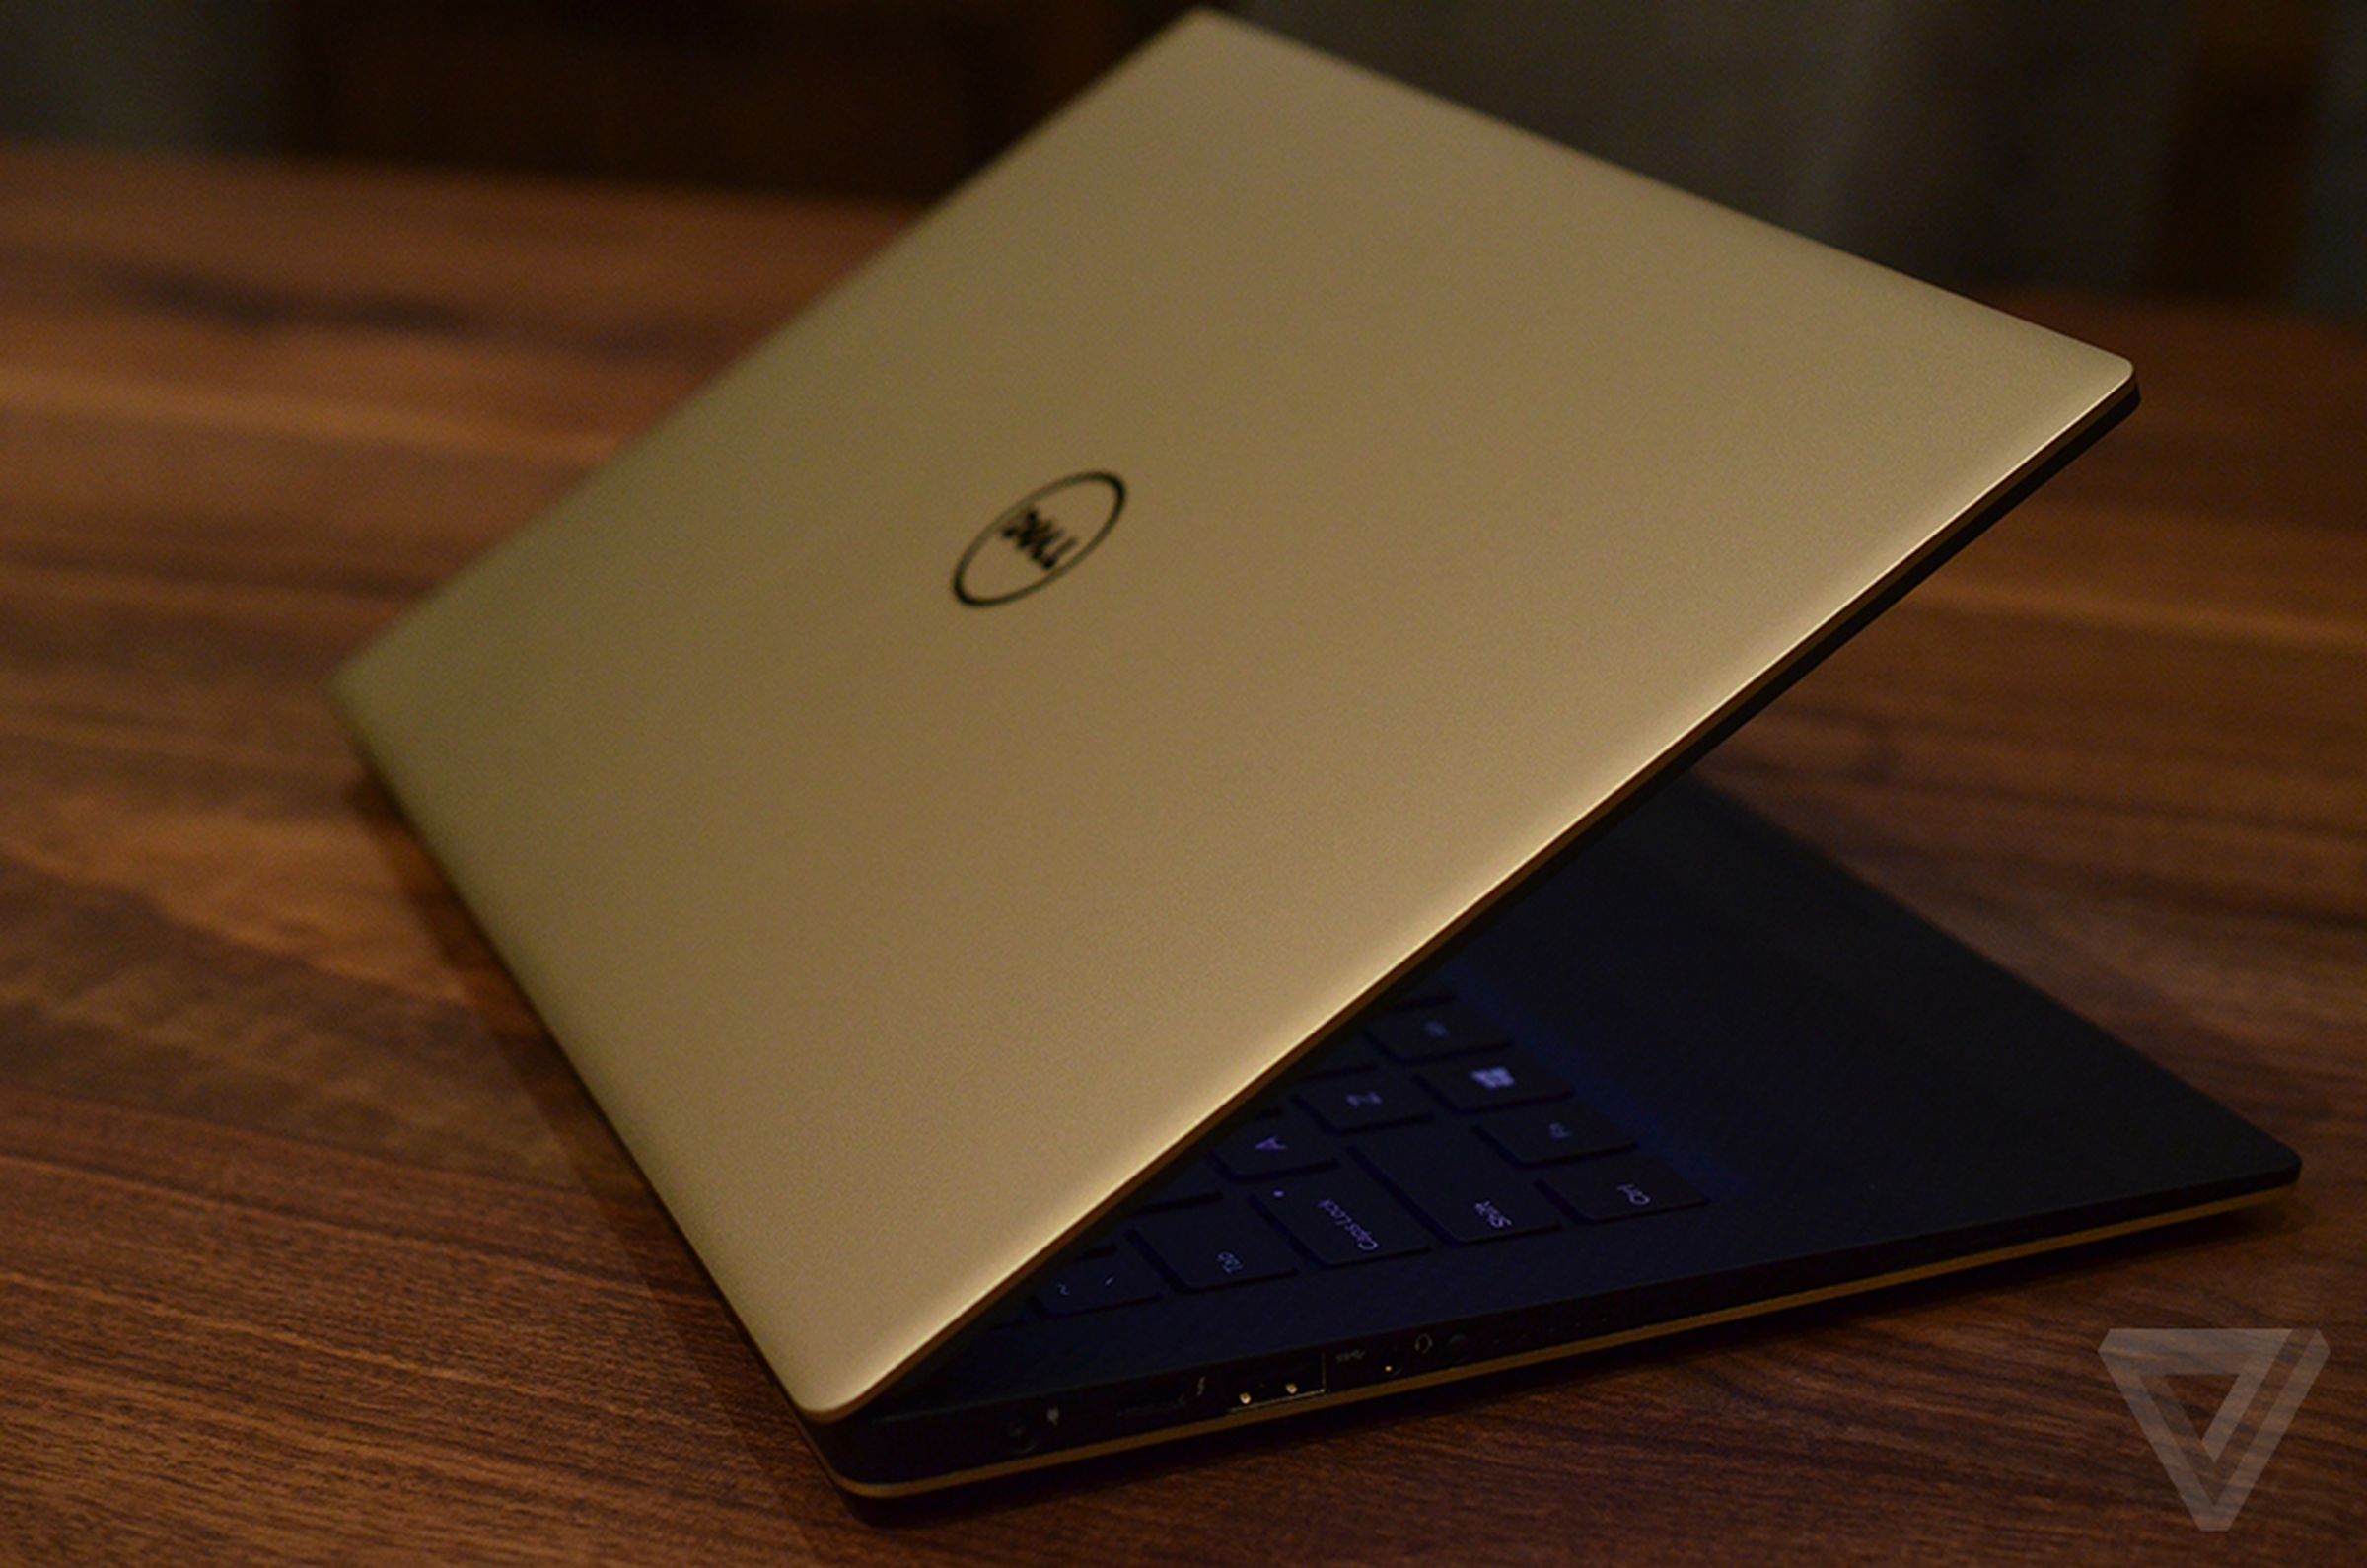 Dell XPS 13 gold edition hands-on photos